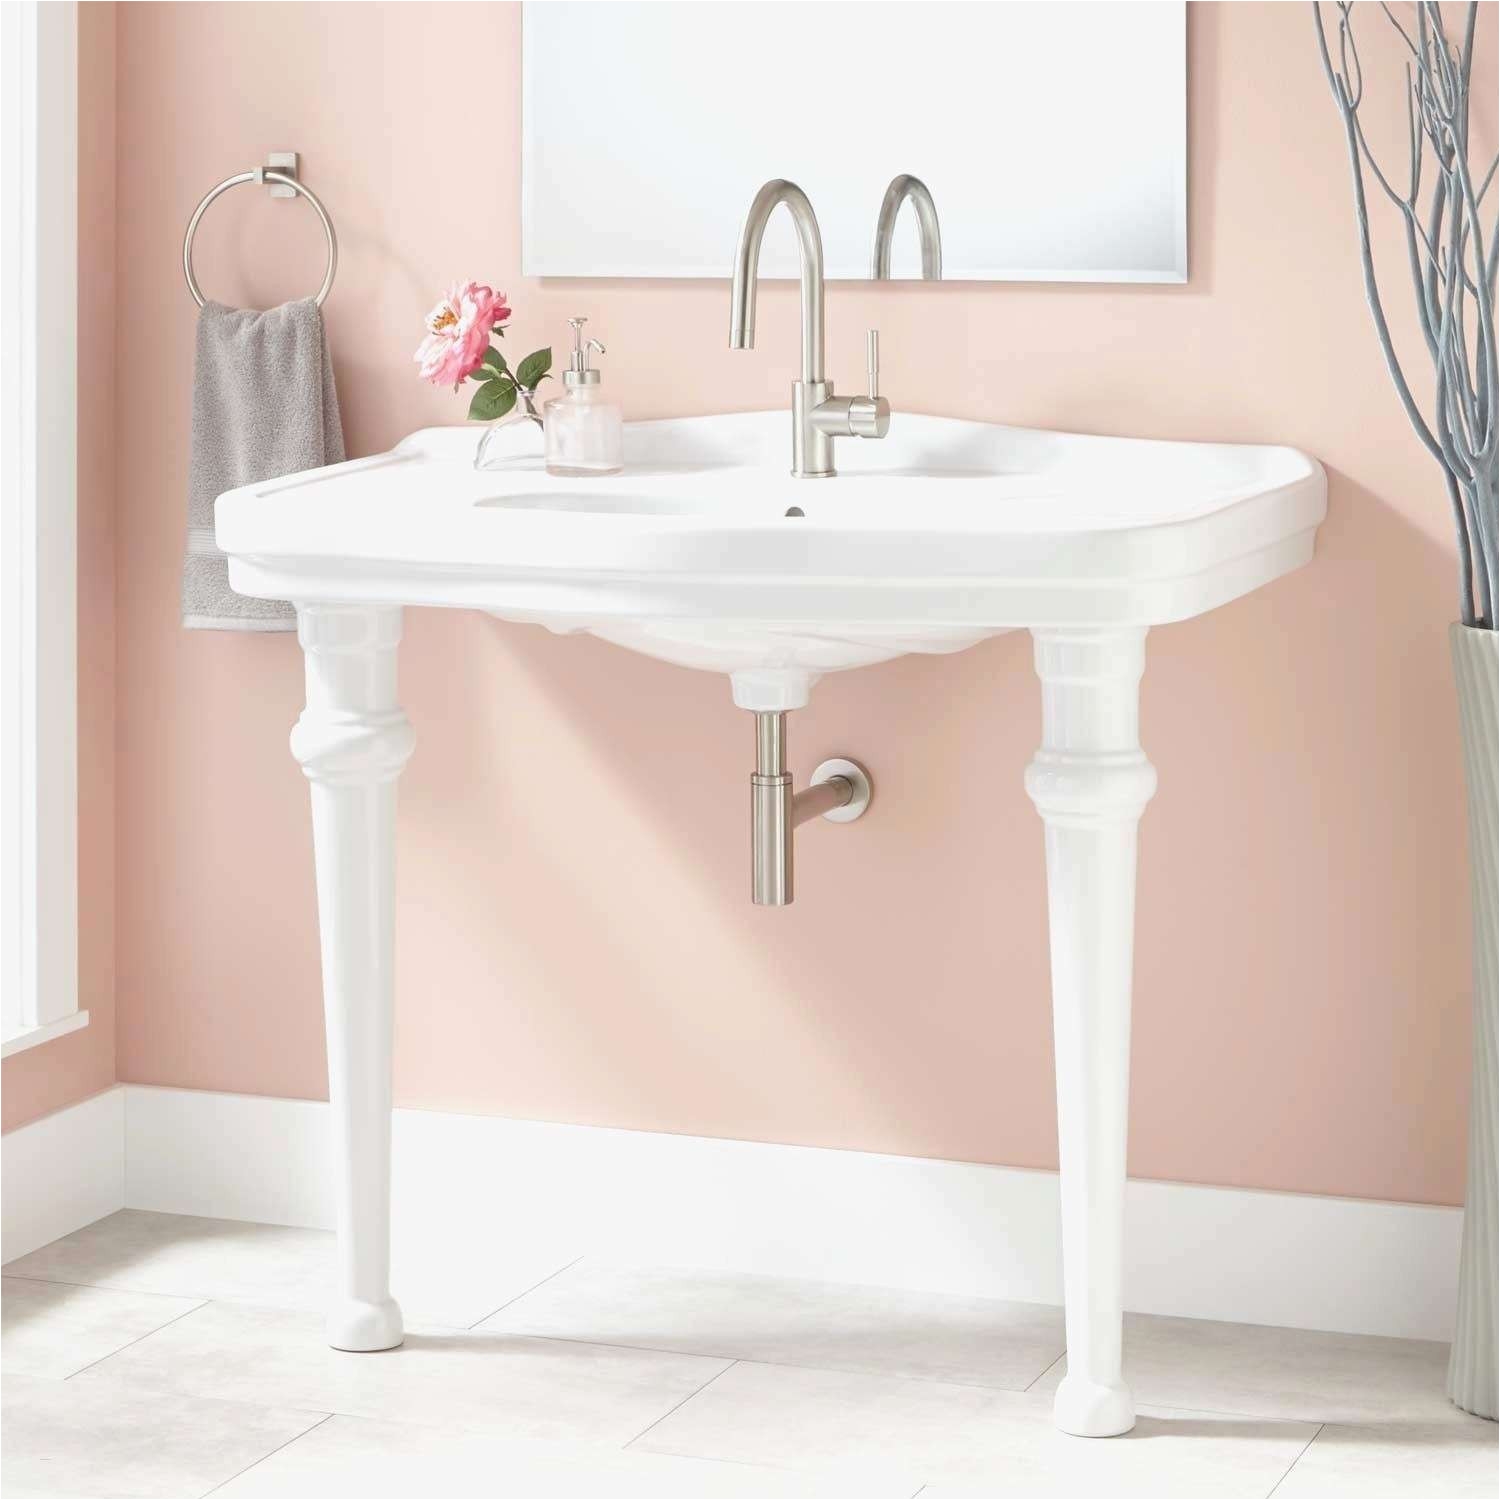 Bath Remodel Ideas Also Lovely Beautiful Awesome Bathroom Picture Ideas Lovely Tag toilet Ideas 0d